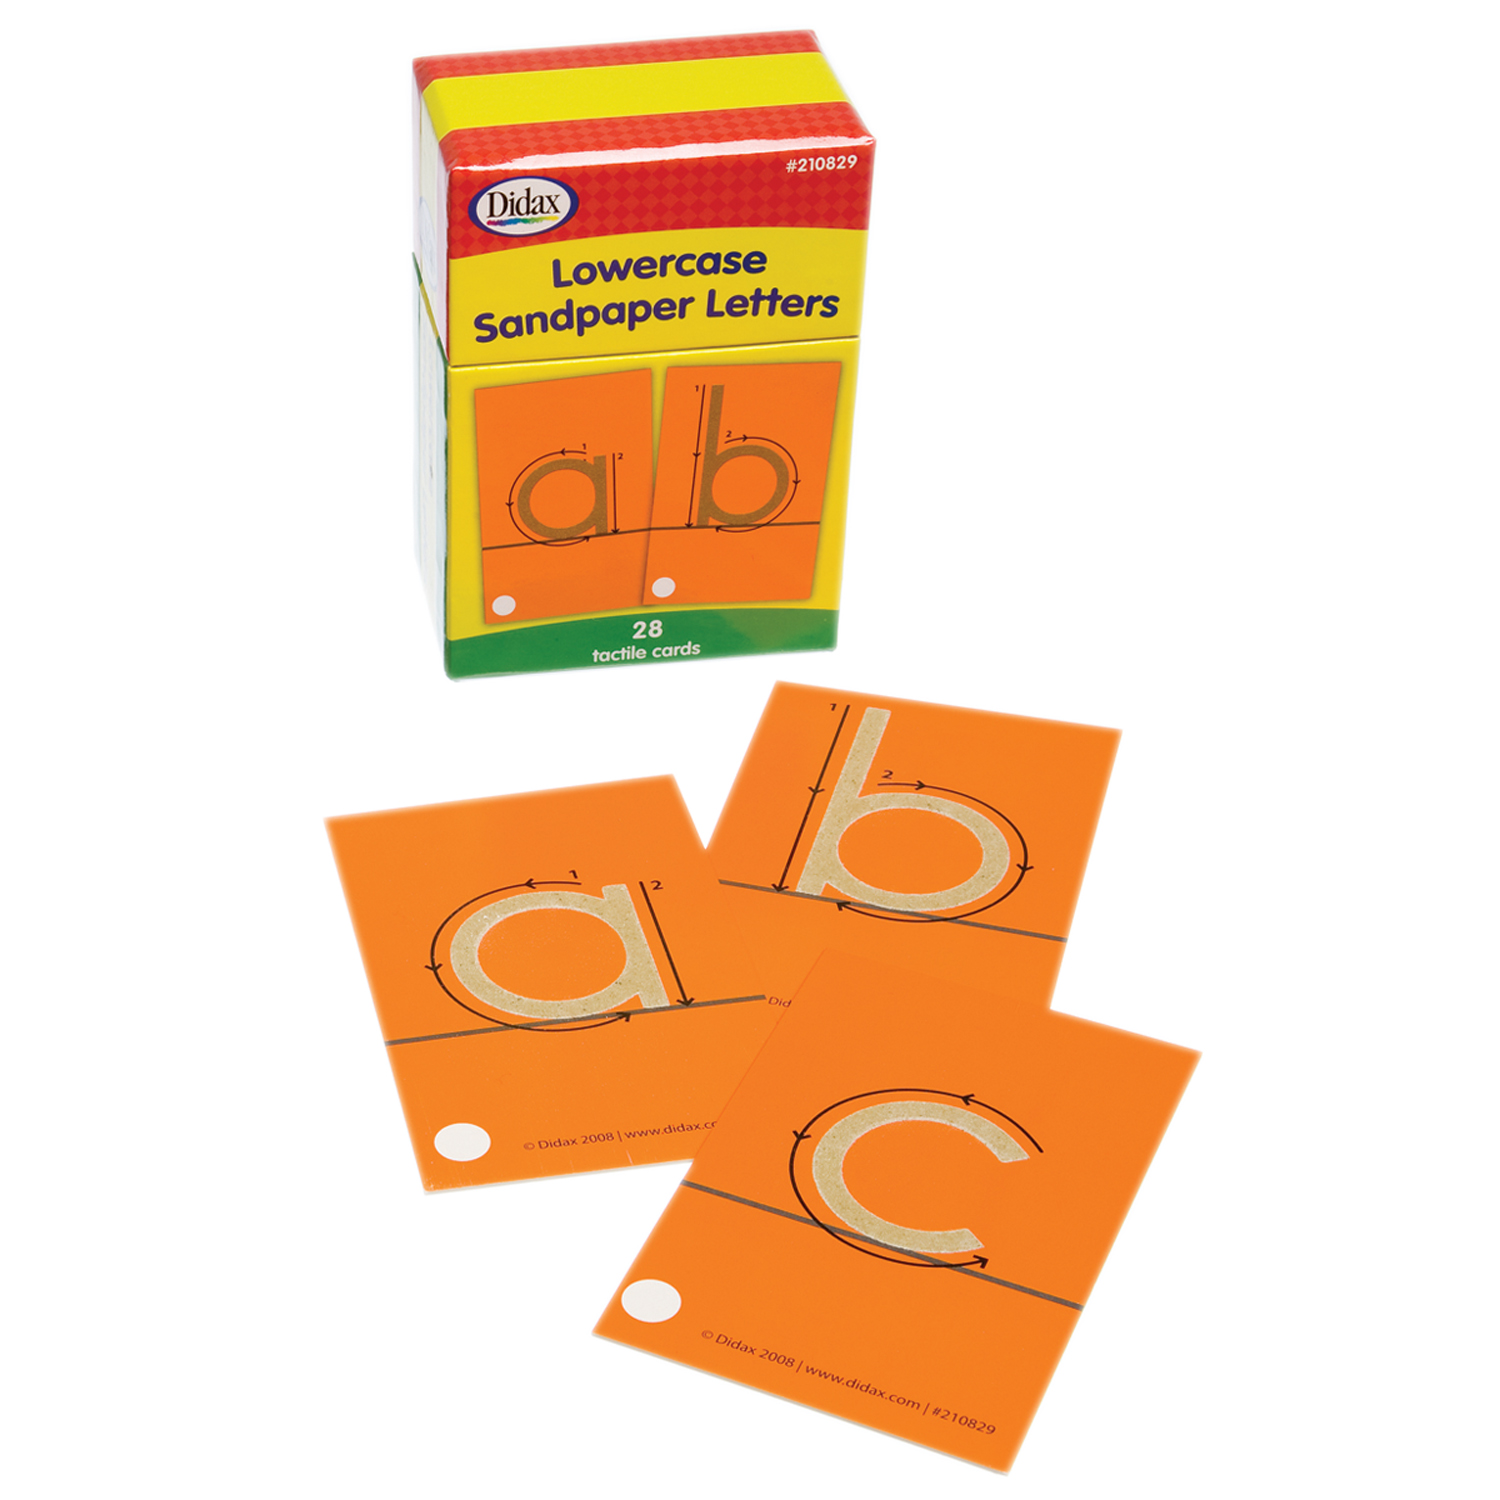 Didax Tactile Sandpaper Lowercase Letters